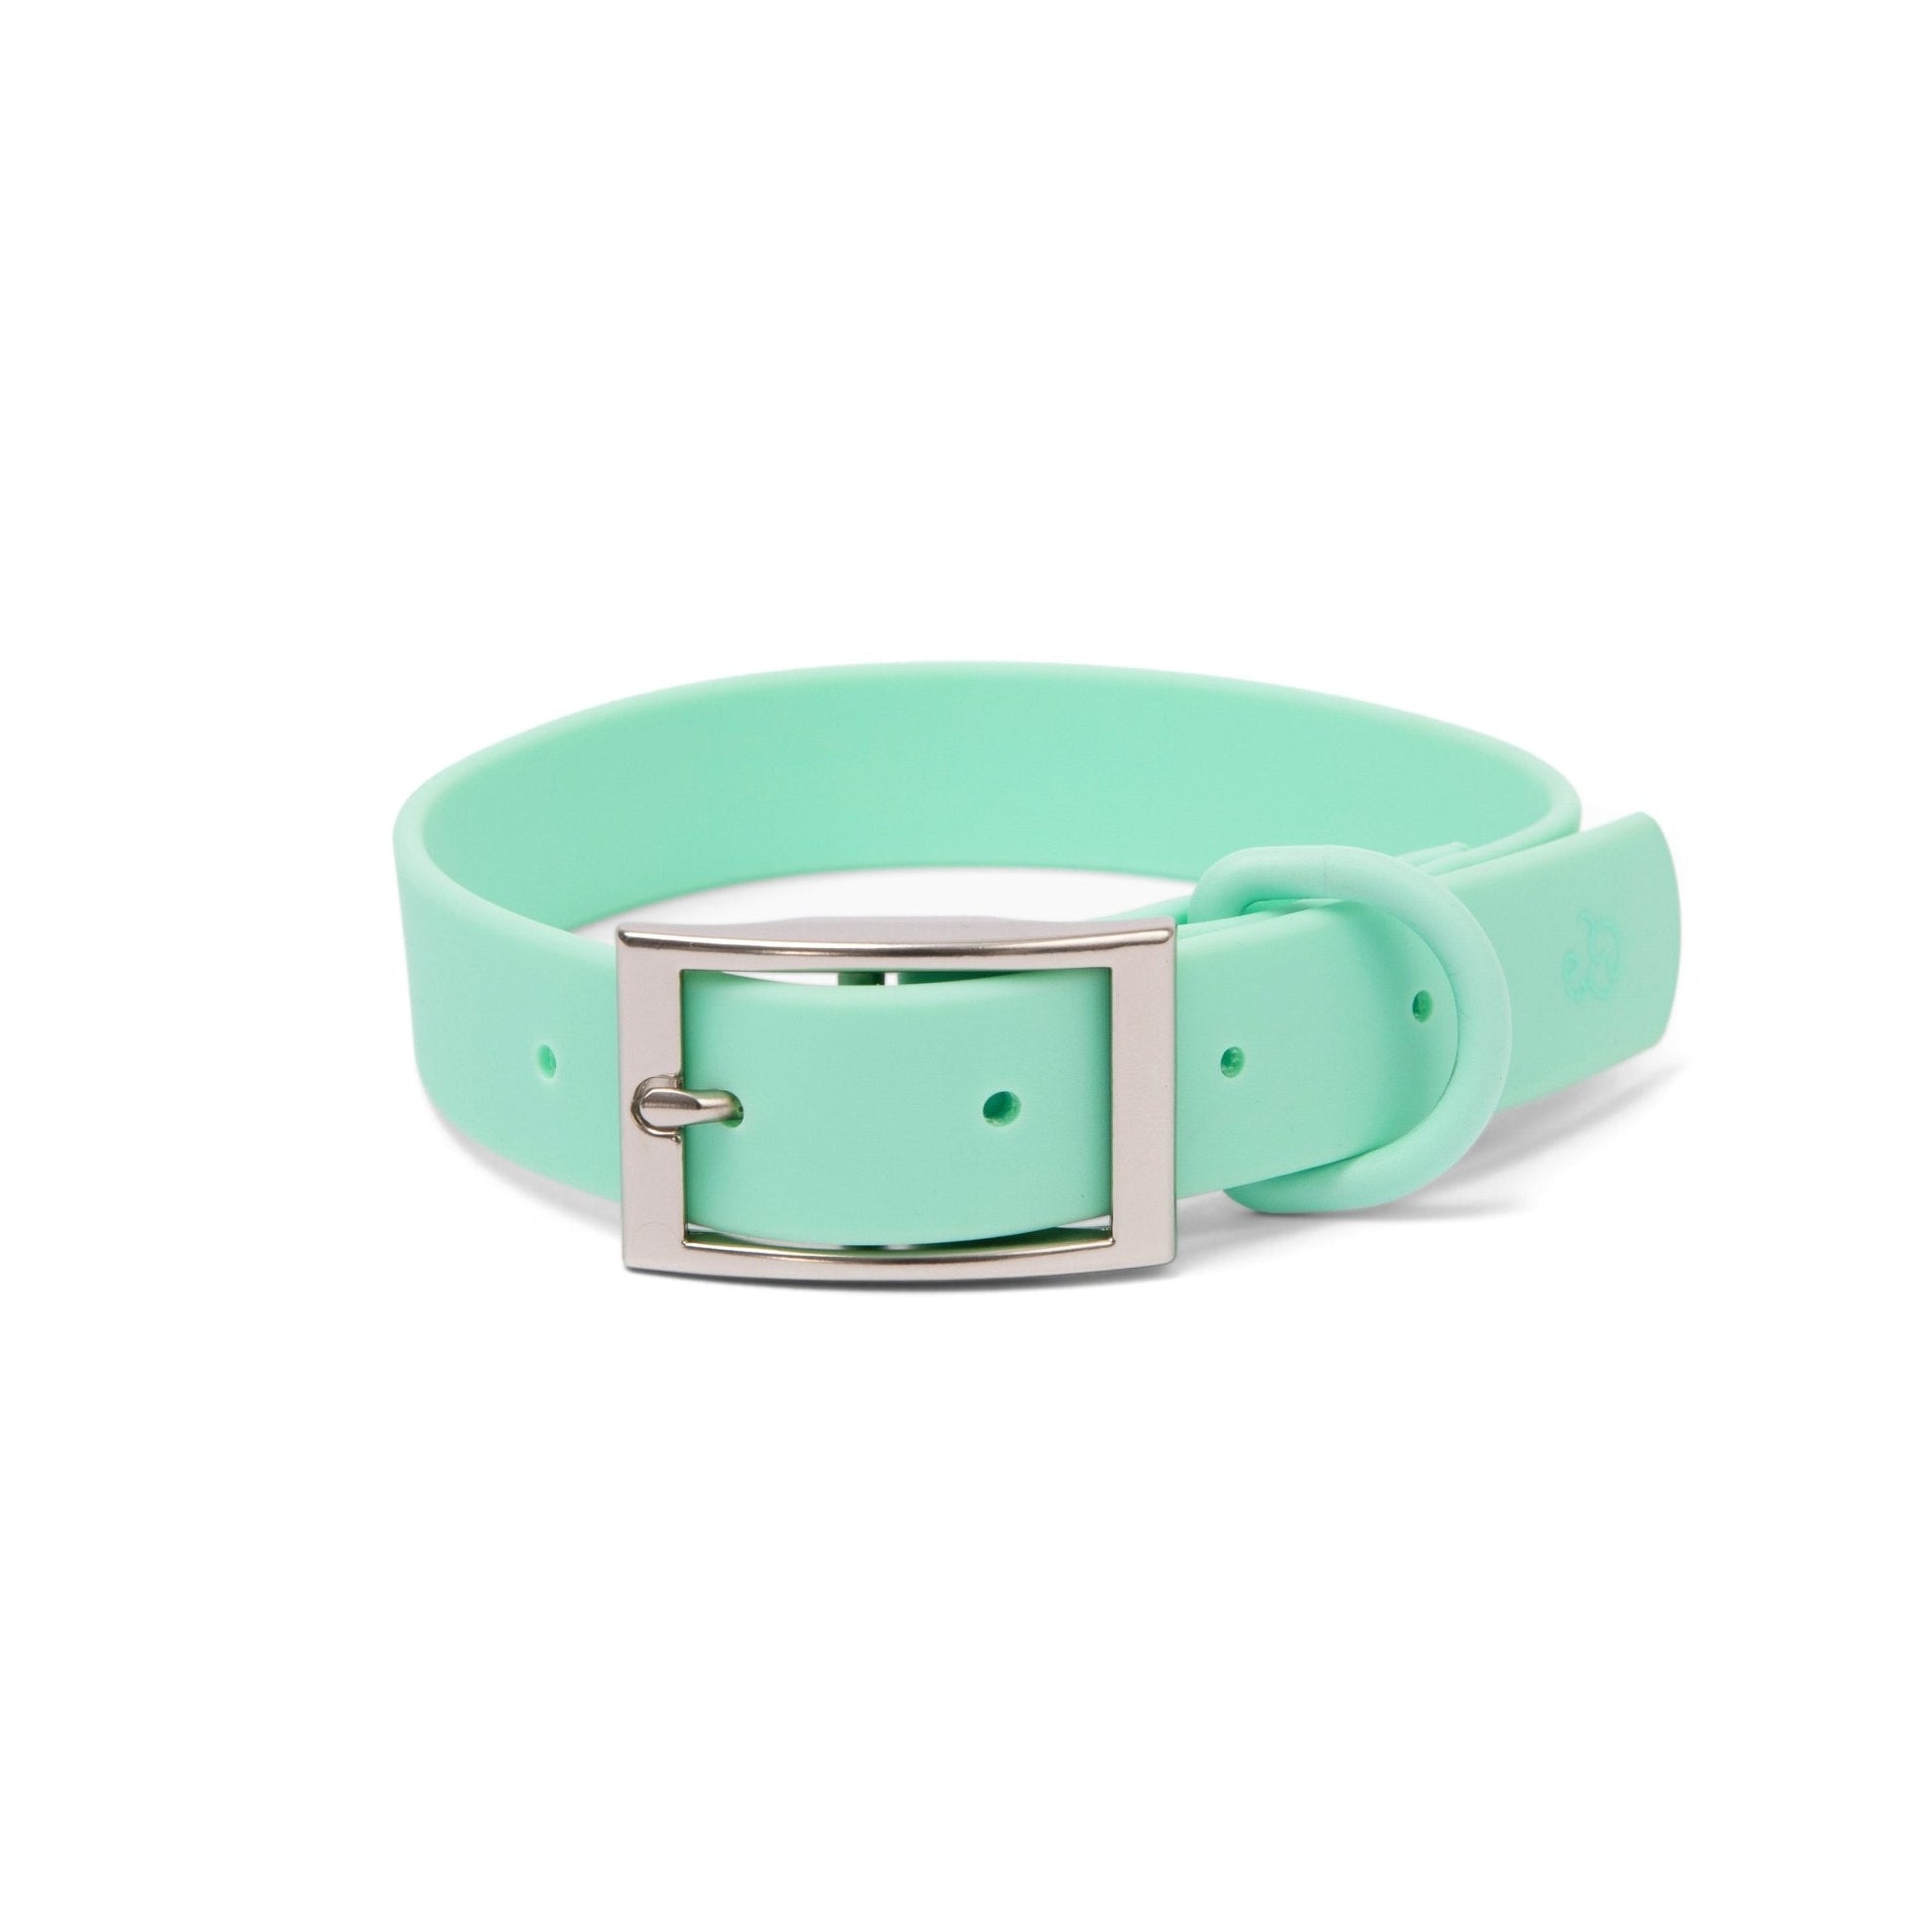 Lucy & Co. The Pine Everyday PVC Collar, Small, Green